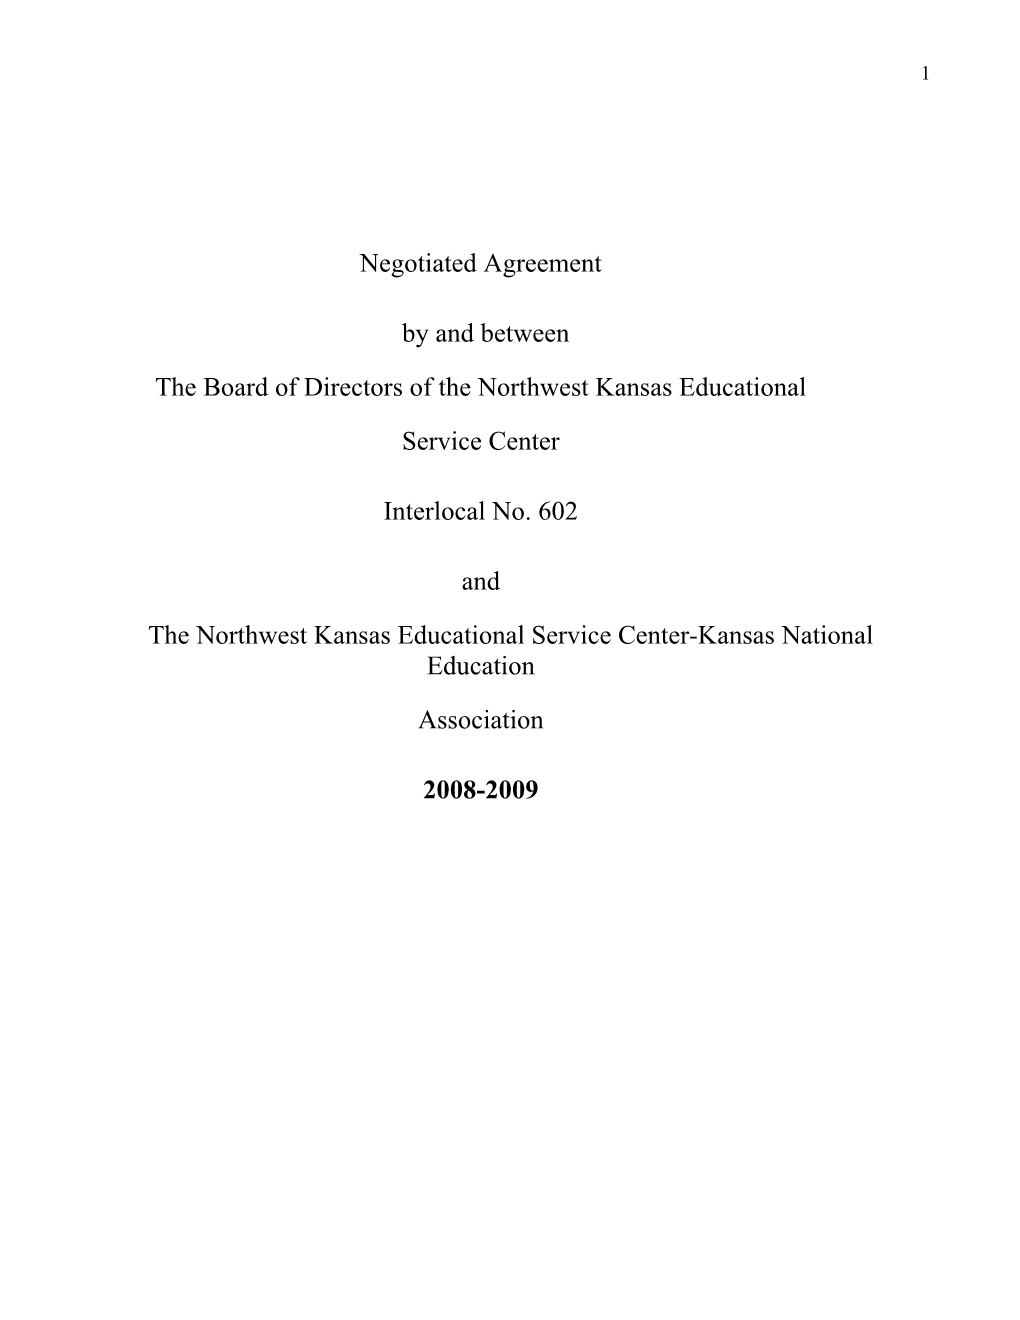 Negotiated Agreement by and Between the Board of Directors of The